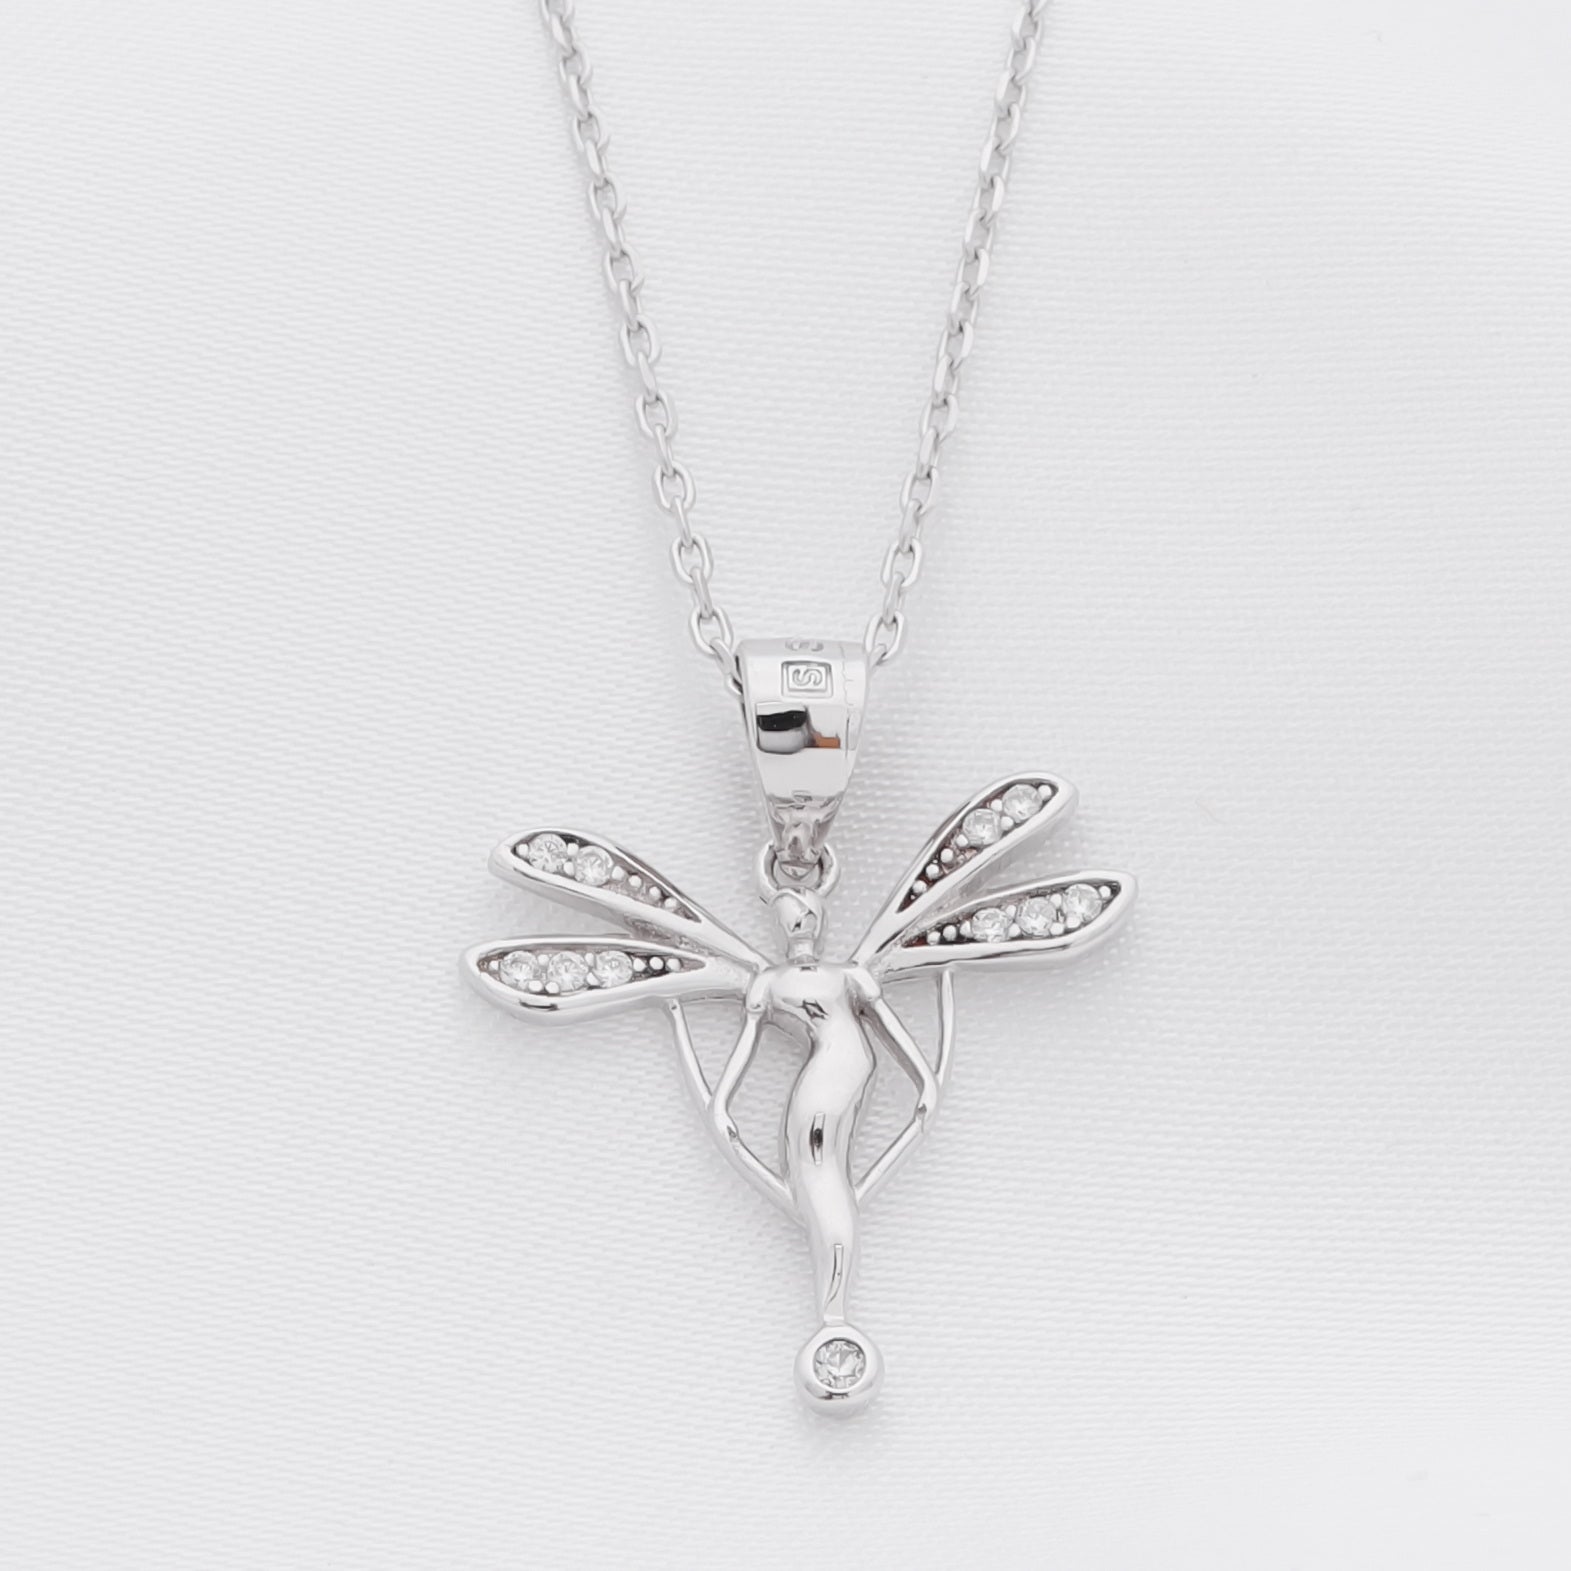 CZ Fairy Sterling Silver Necklace-Cubic Zirconia, Jewellery, Necklaces, New, Sterling Silver Necklaces, Women's Jewellery, Women's Necklace-ssp0079-1-Glitters